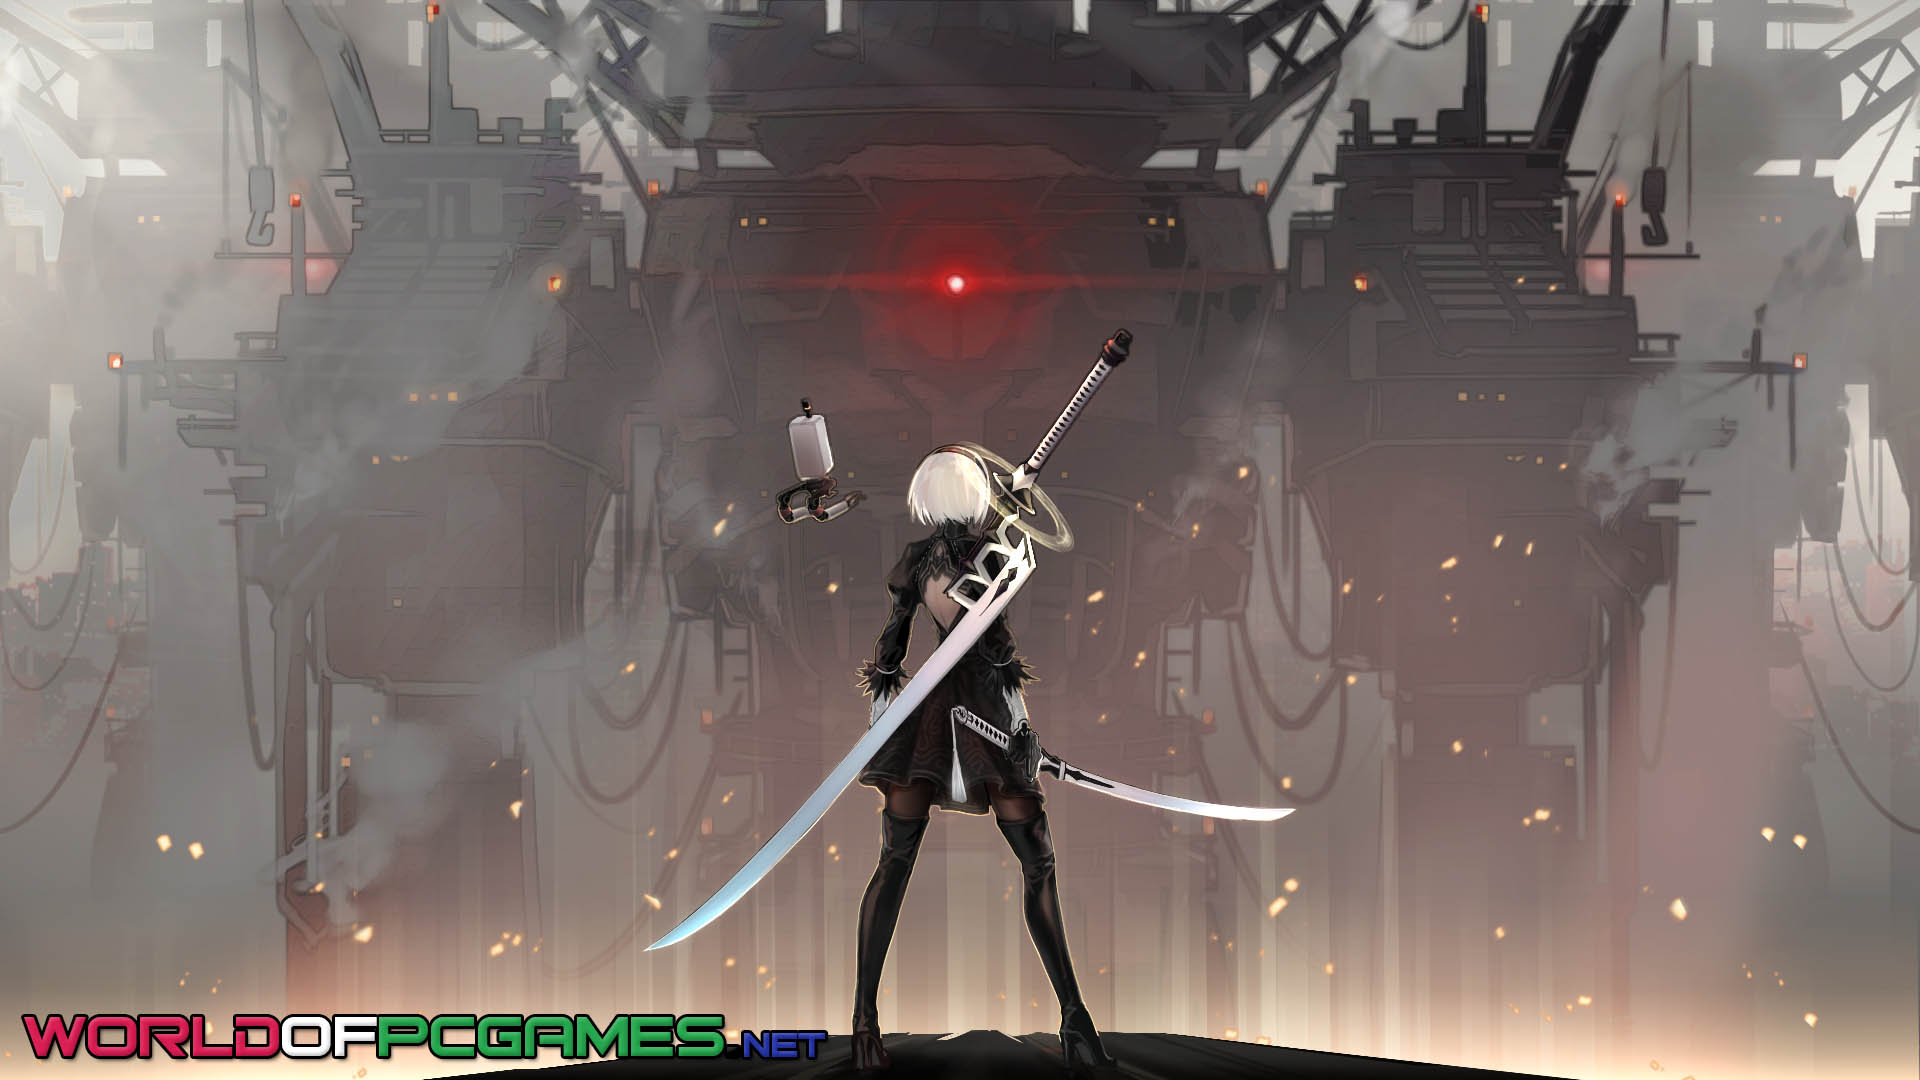 Nier Automata Repack With DLCs Free Download By worldof-pcgames.net